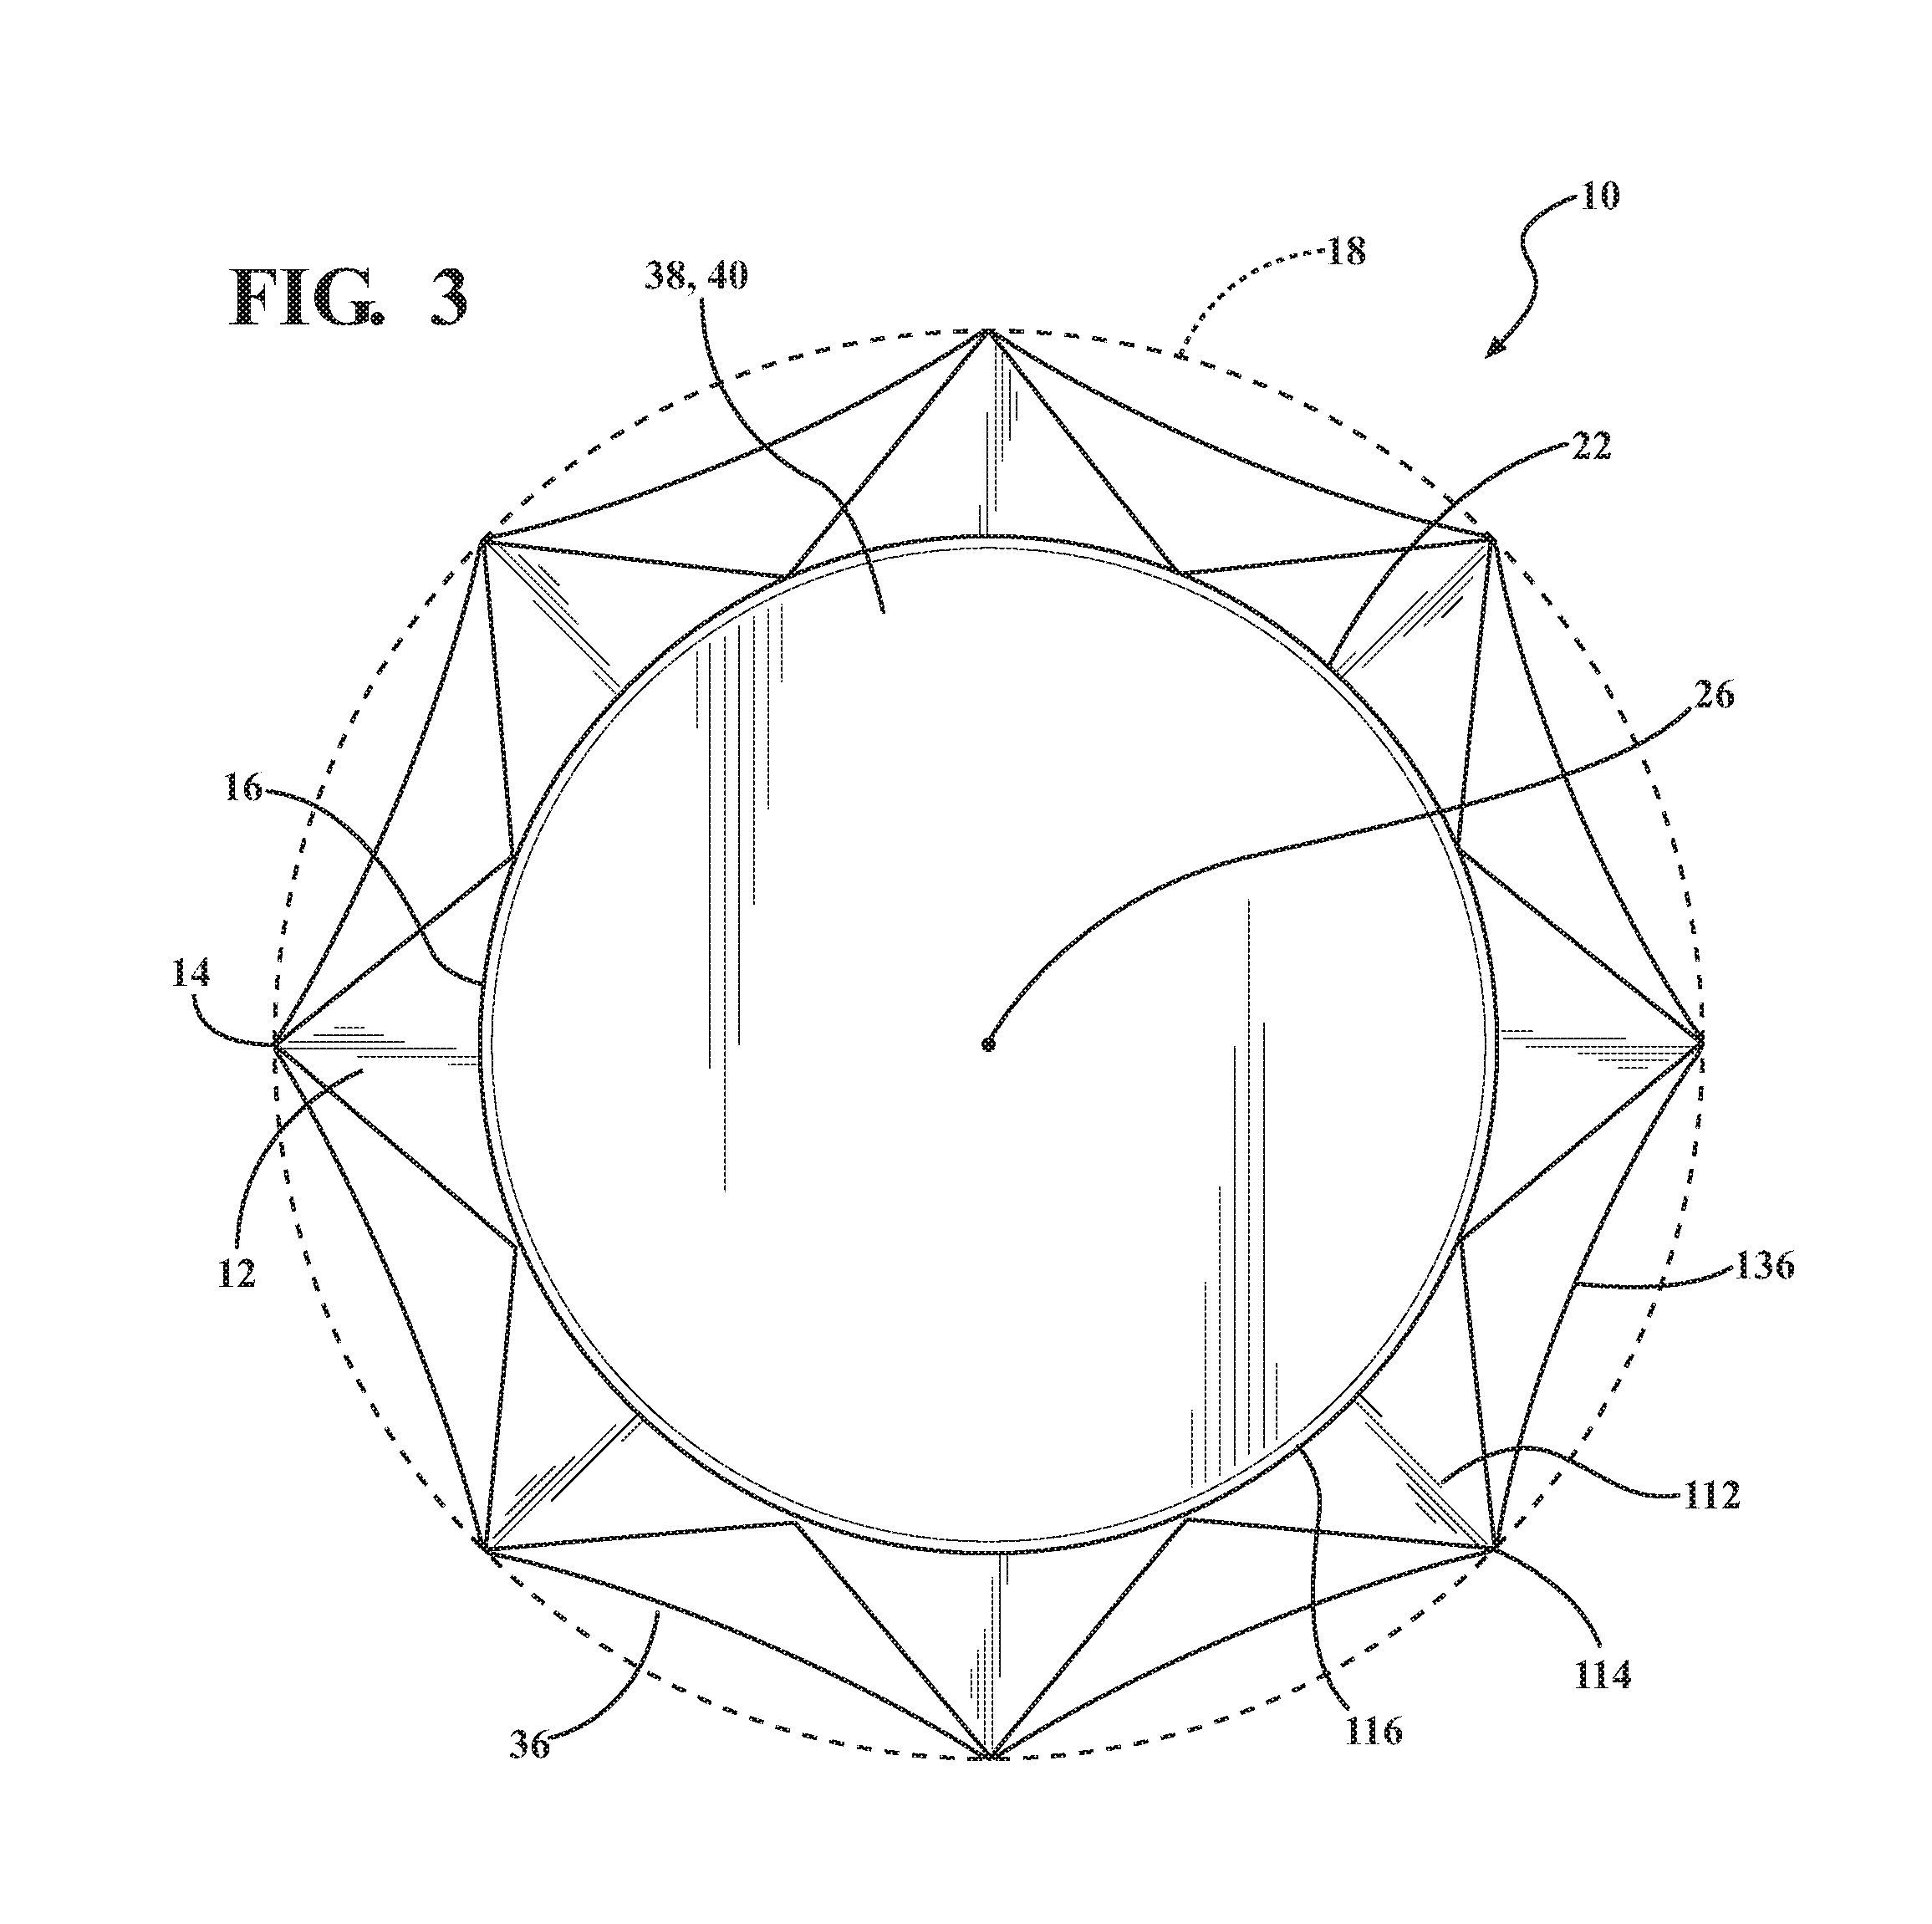 Accommodating intraocular lens assembly